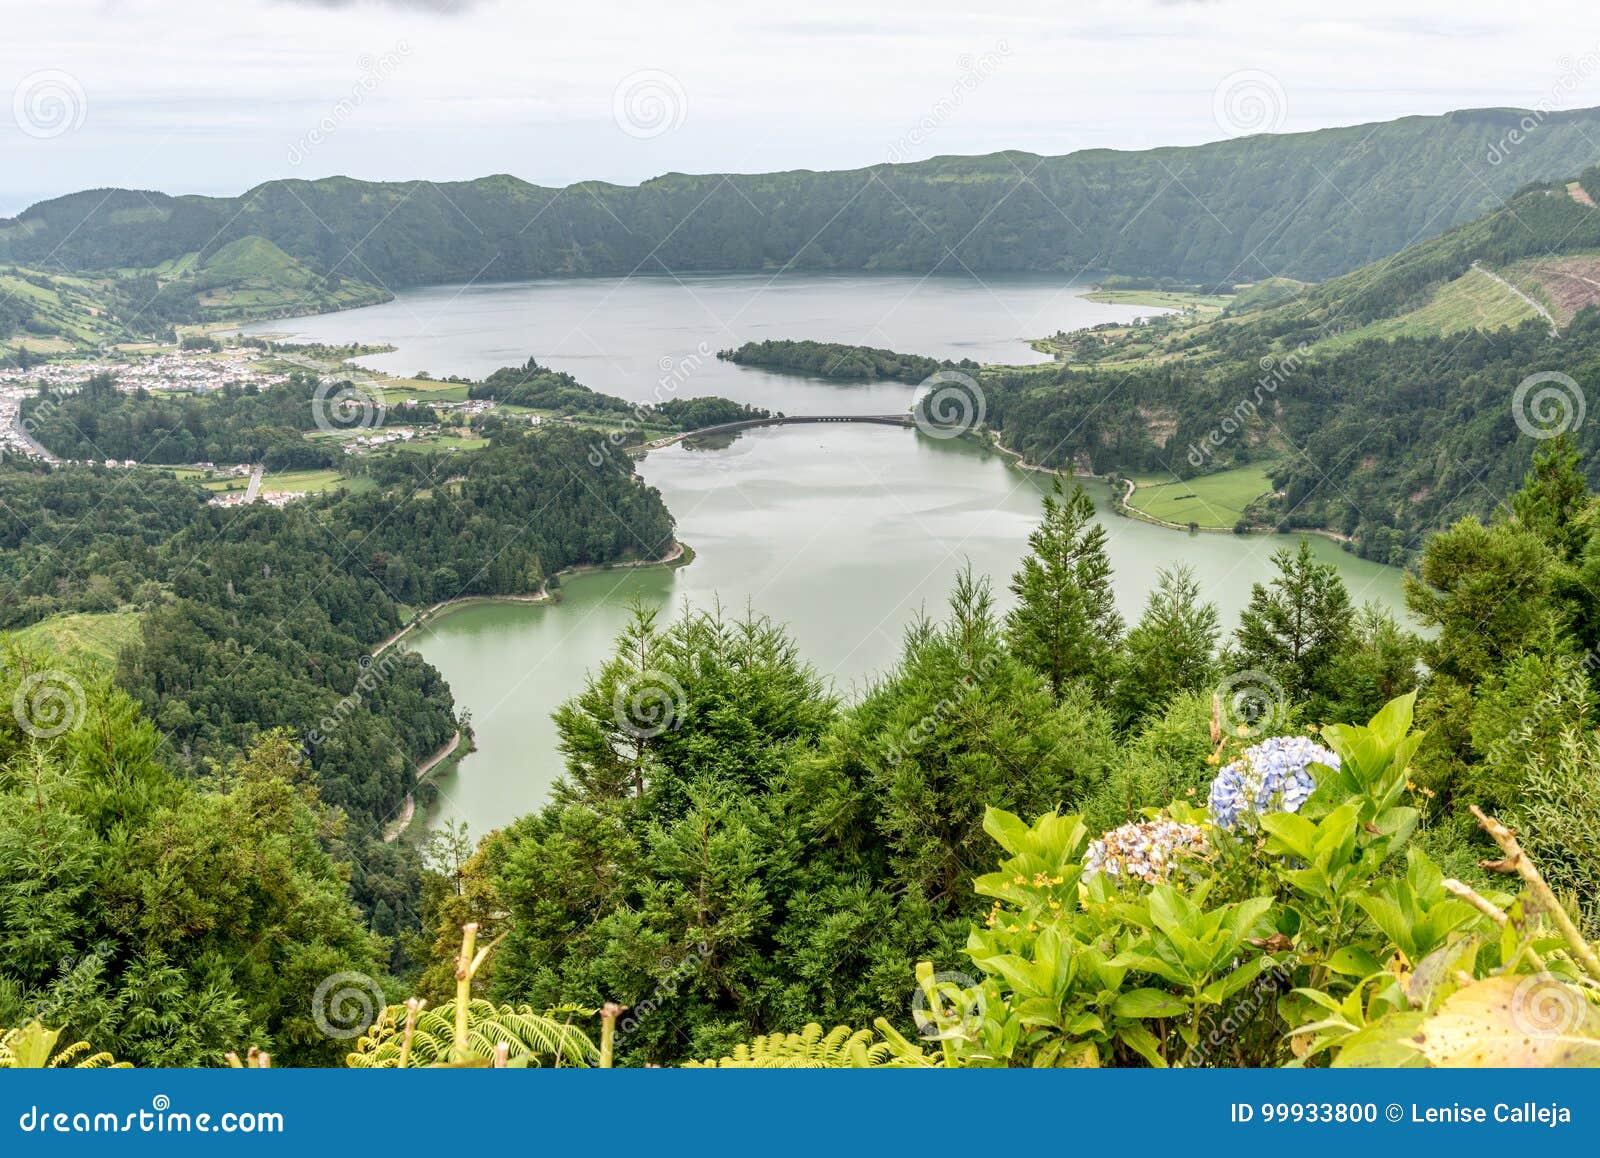 lakes of sete cidades from the miradouro da vista do rei on the island of sao miguel in the azores, portugal